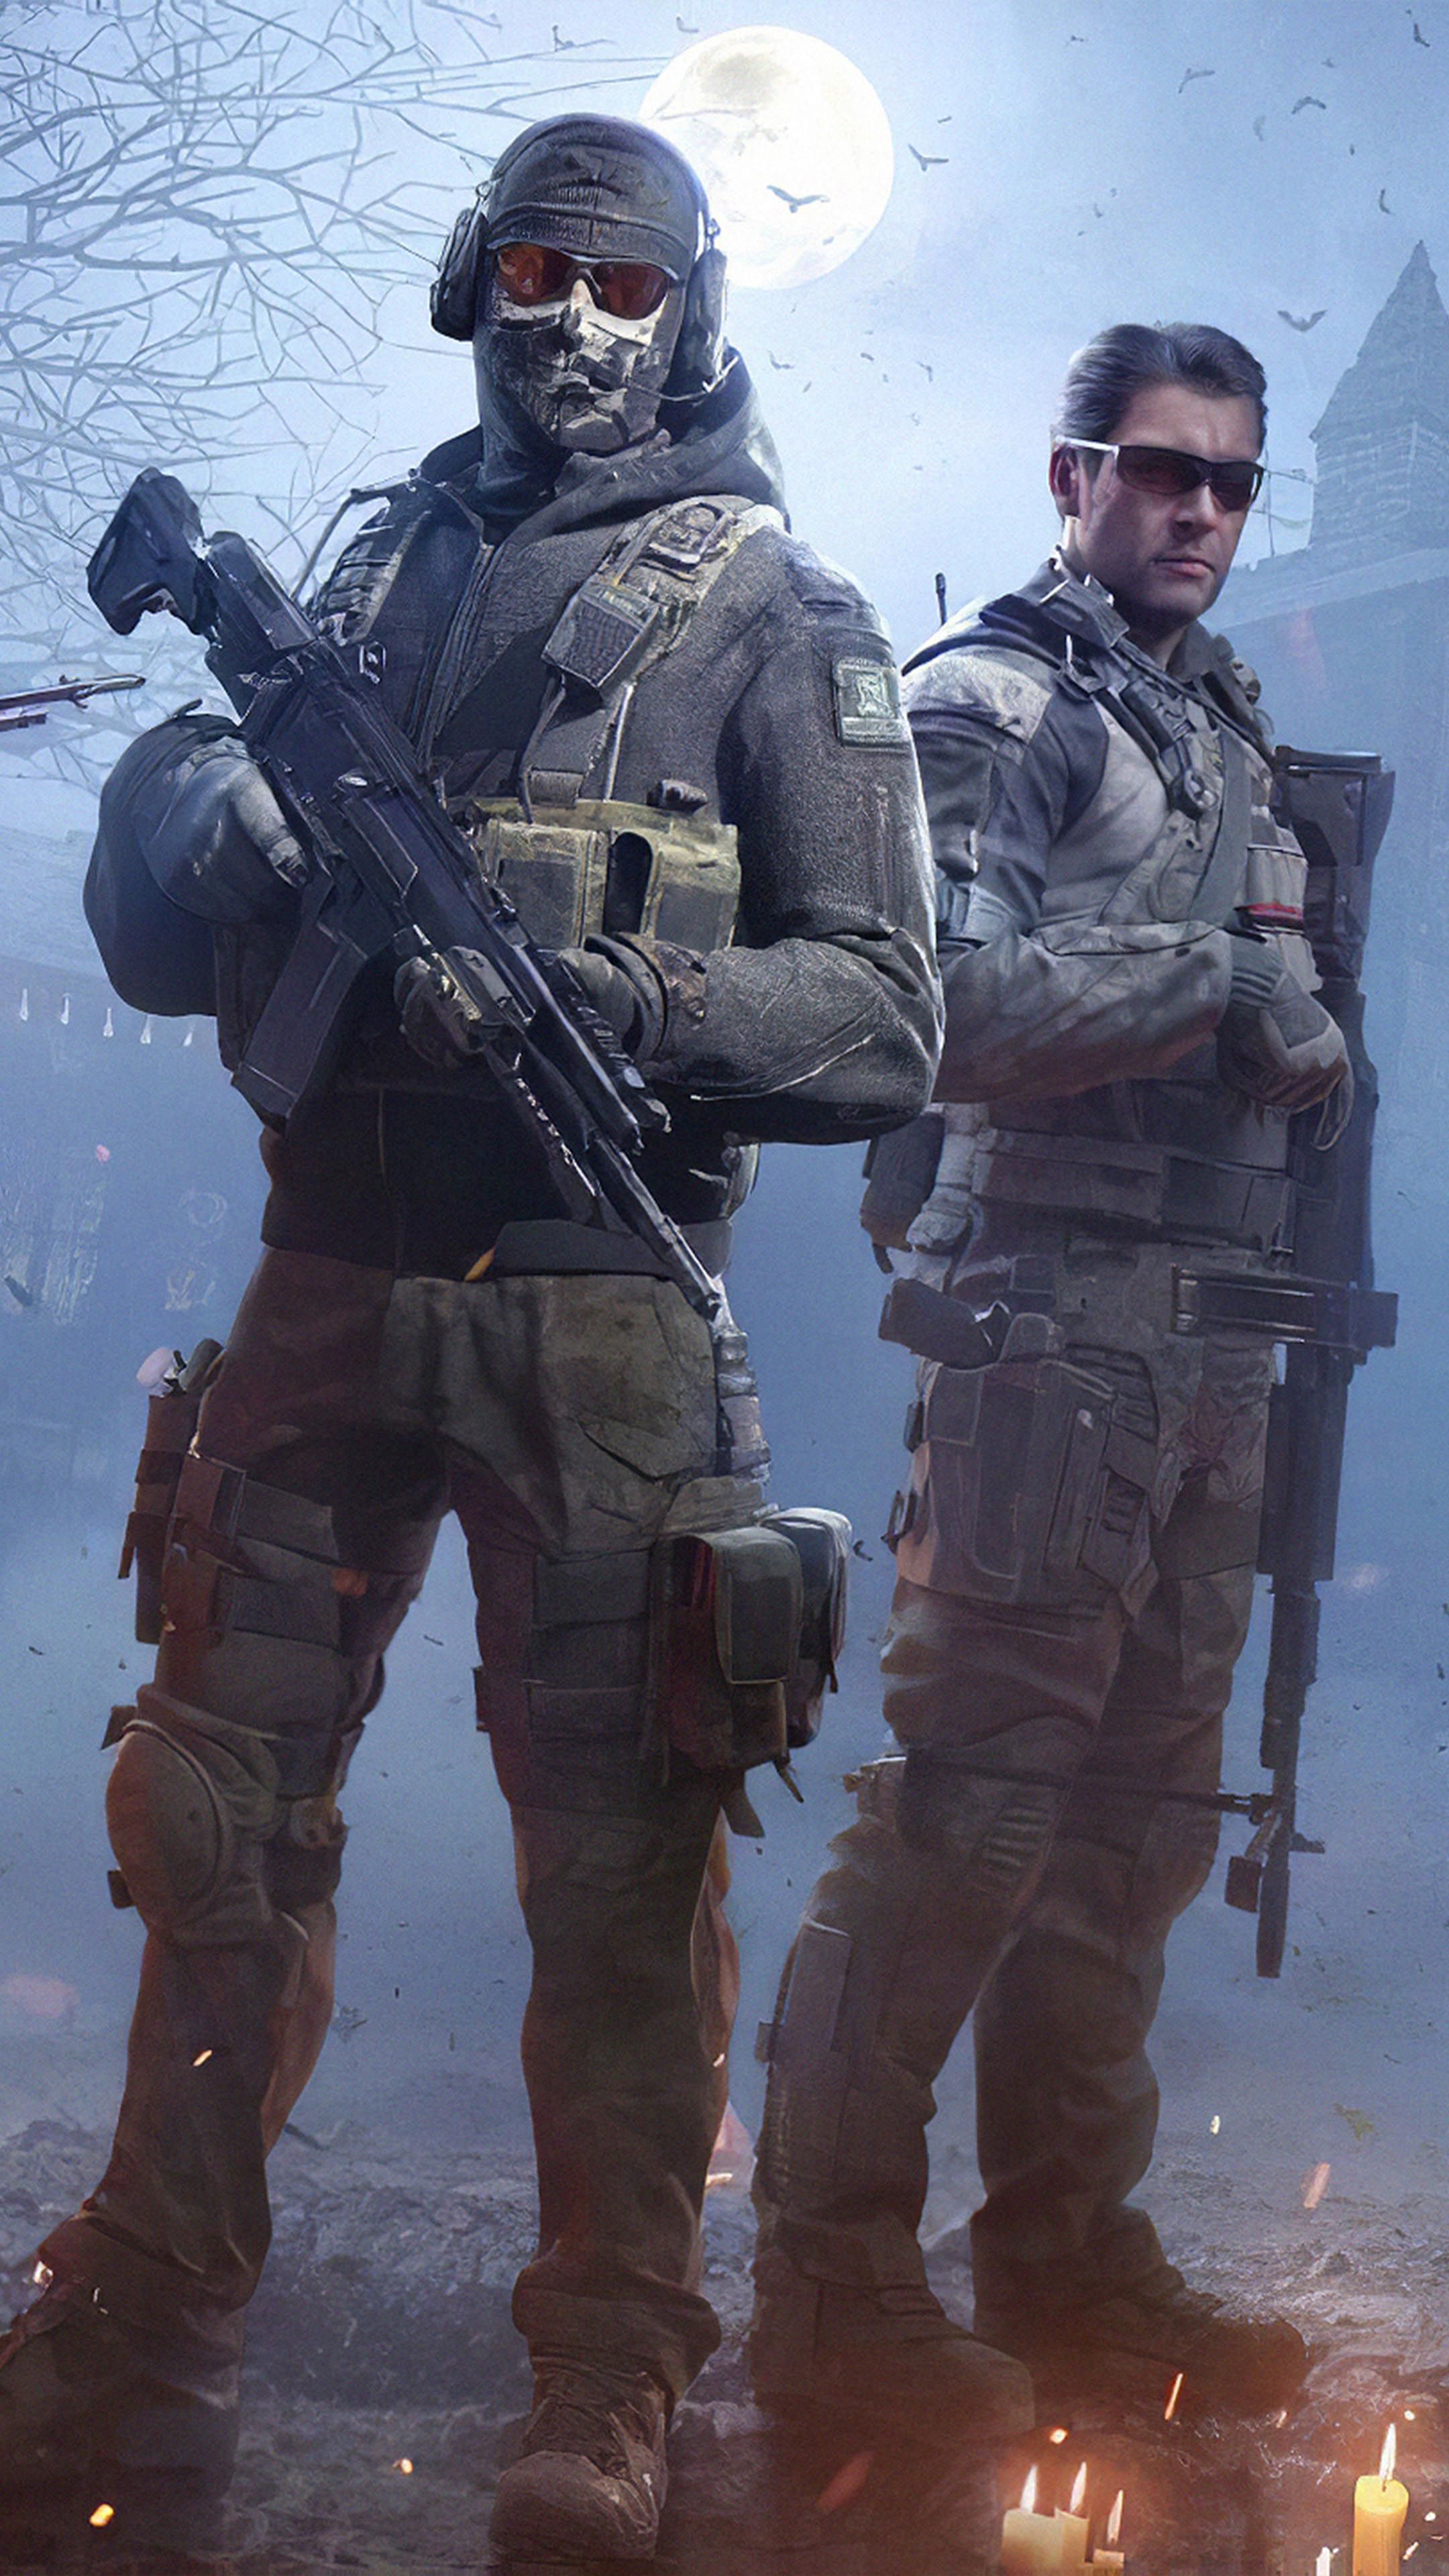 Squad Call of Duty Mobile 4K Ultra HD Mobile Wallpaper. Call of duty ghosts, Call of duty black, Call off duty